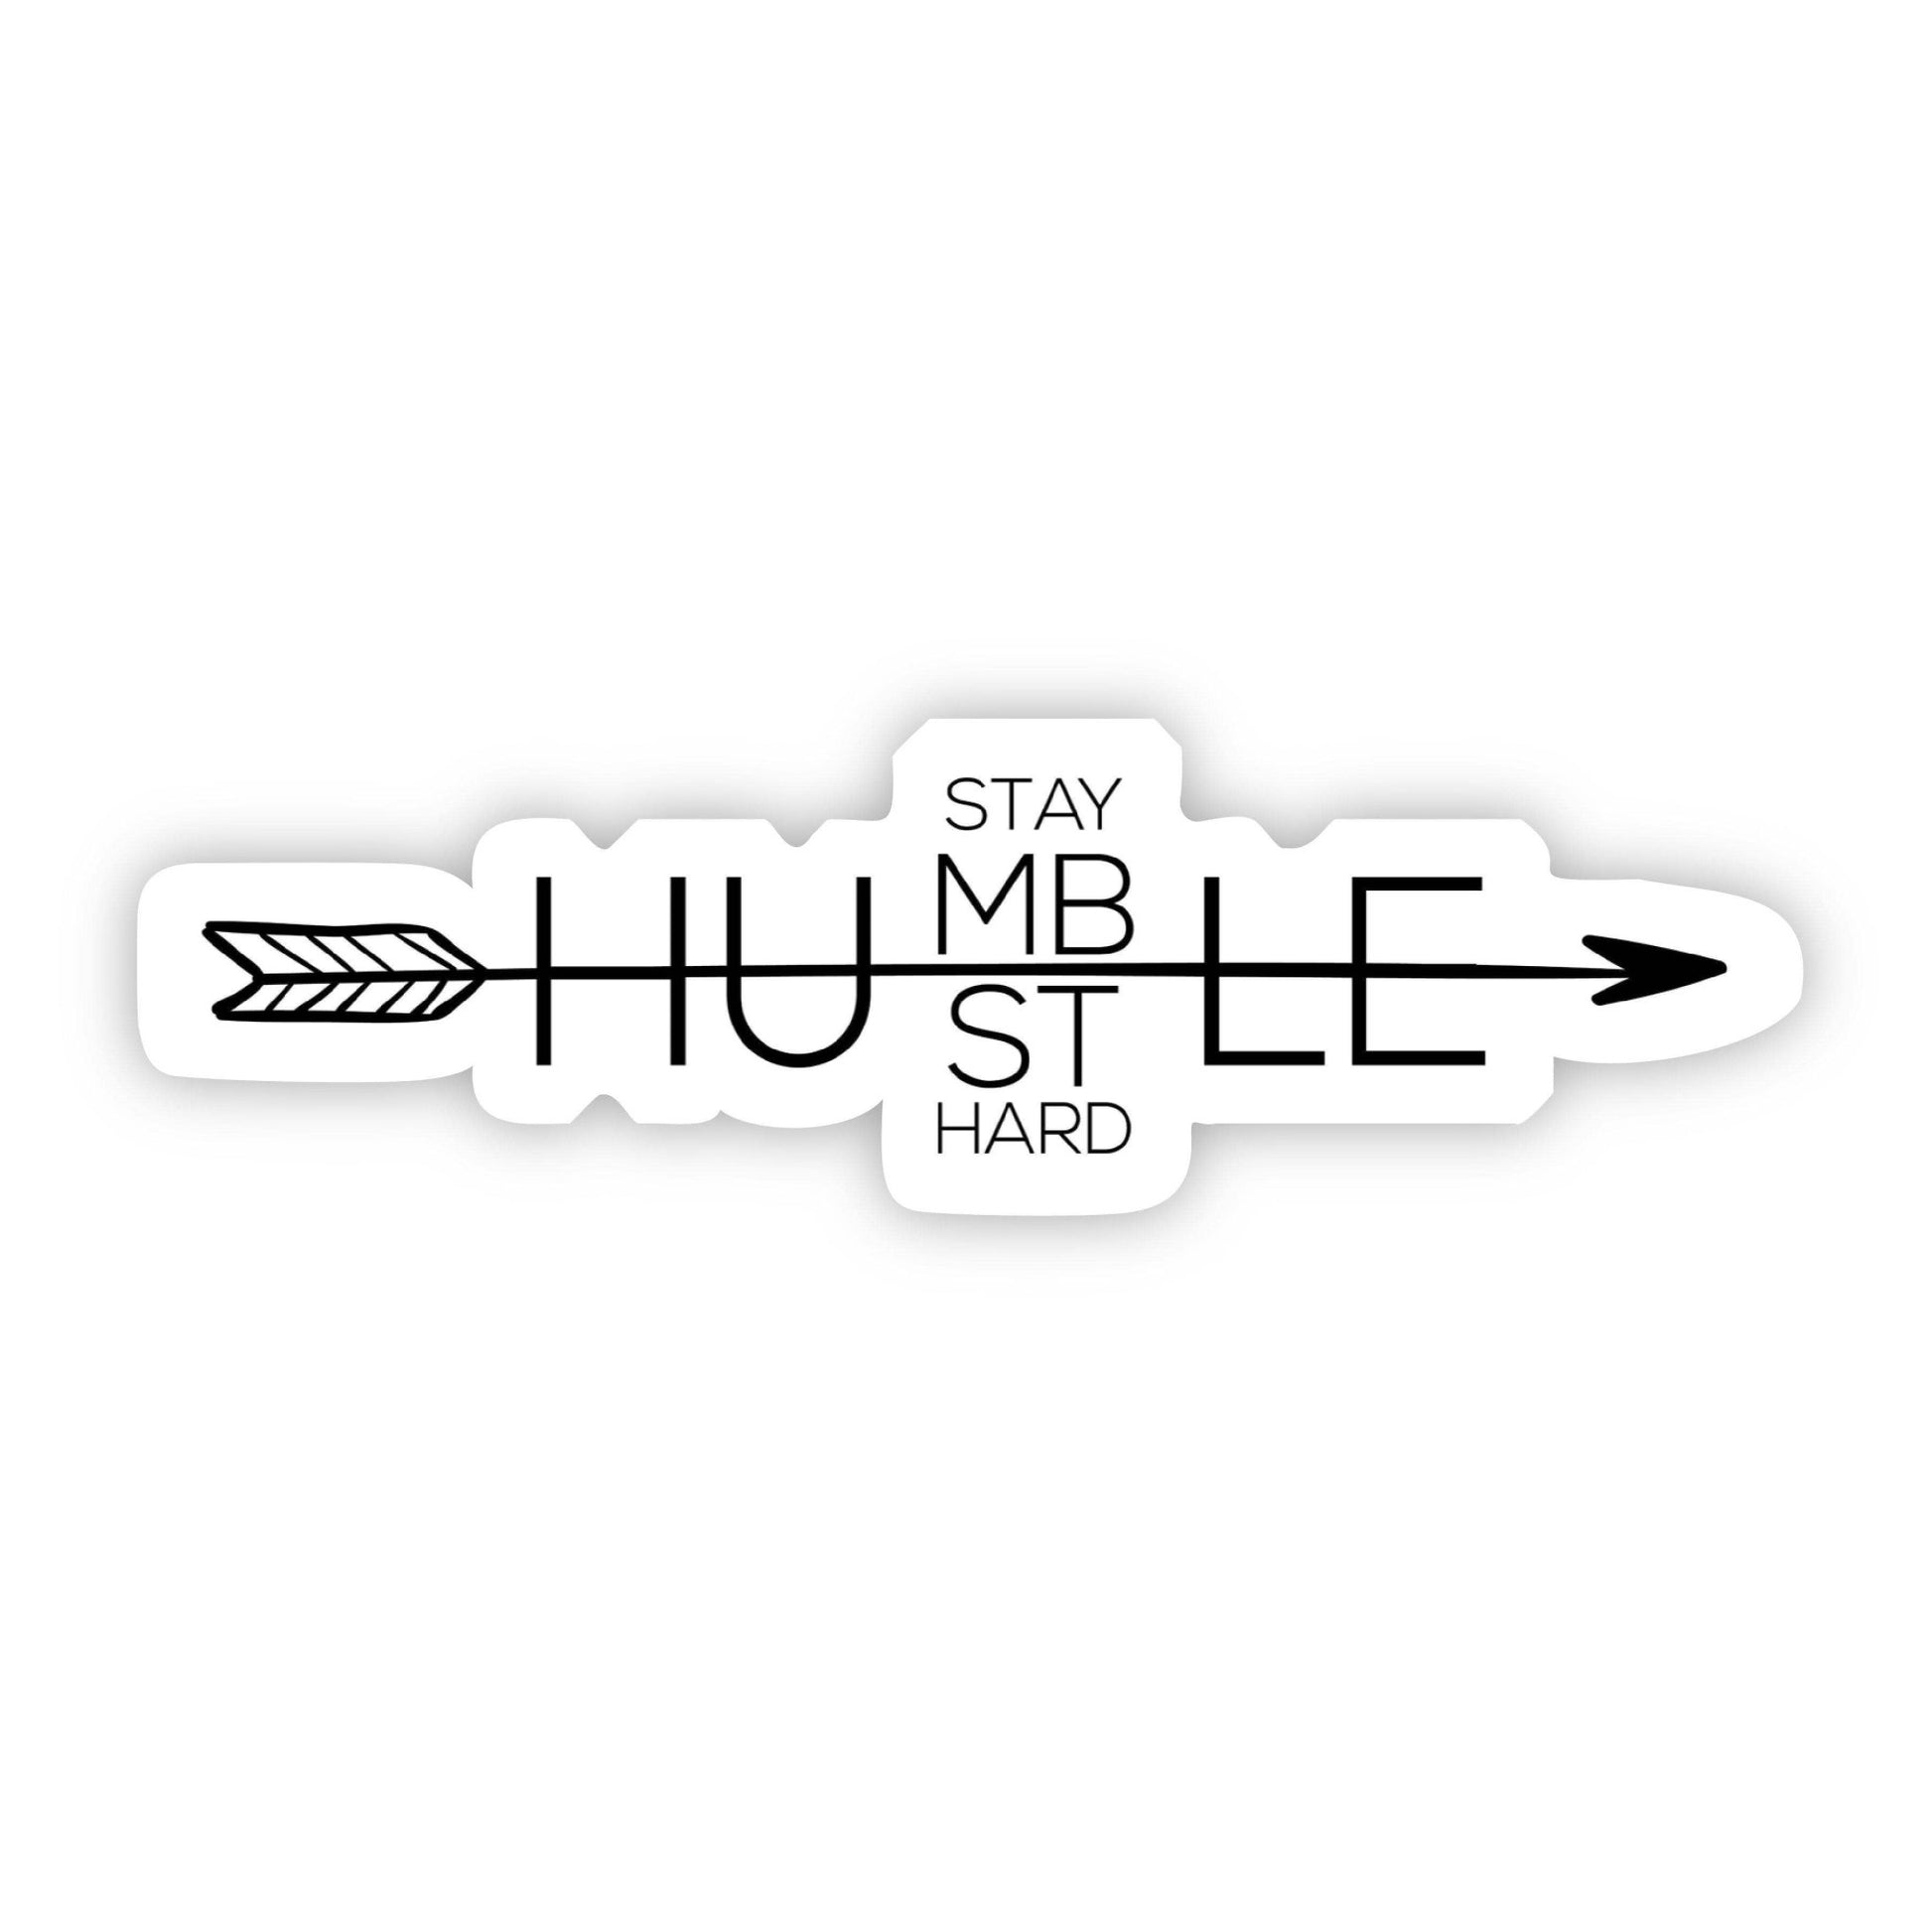 Stay Humble Hustle Hard Sticker - [ash-ling] Booksellers